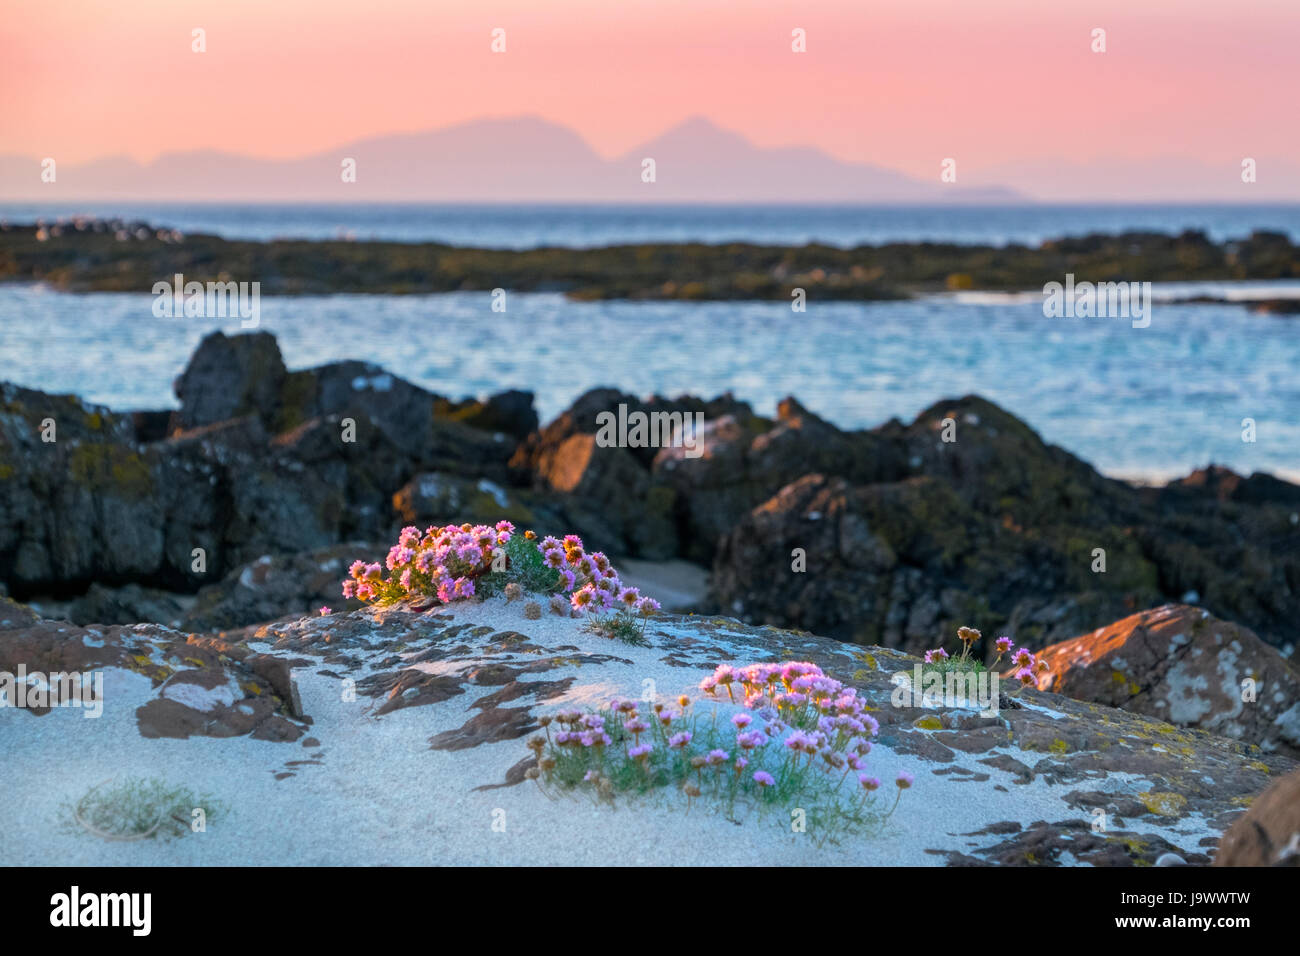 Pink Thrift on the beach at Langamull, Mull with the mountains of Rum in the distance, Scotland Stock Photo